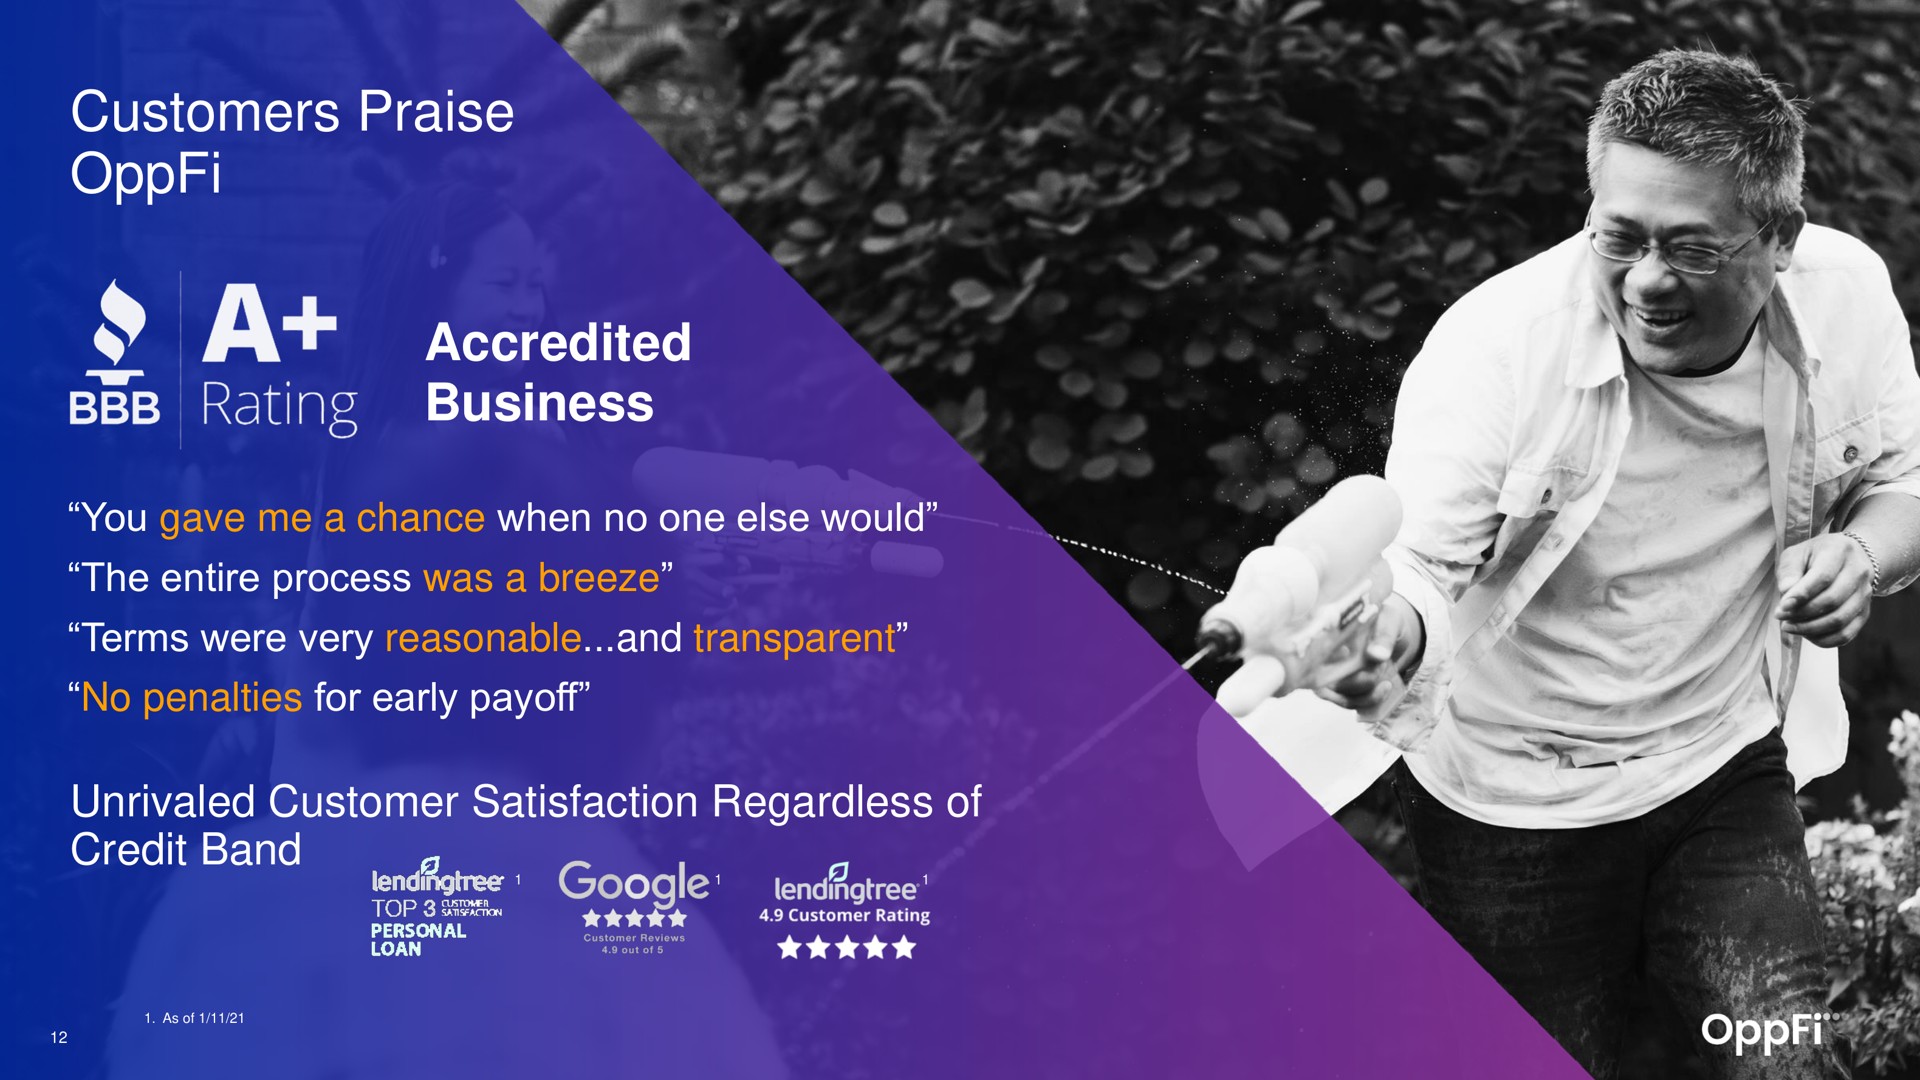 customers praise accredited business you gave me a chance when no one else would the entire process was a breeze terms were very reasonable and transparent no penalties for early payoff unrivaled customer satisfaction regardless of credit band rating | OppFi